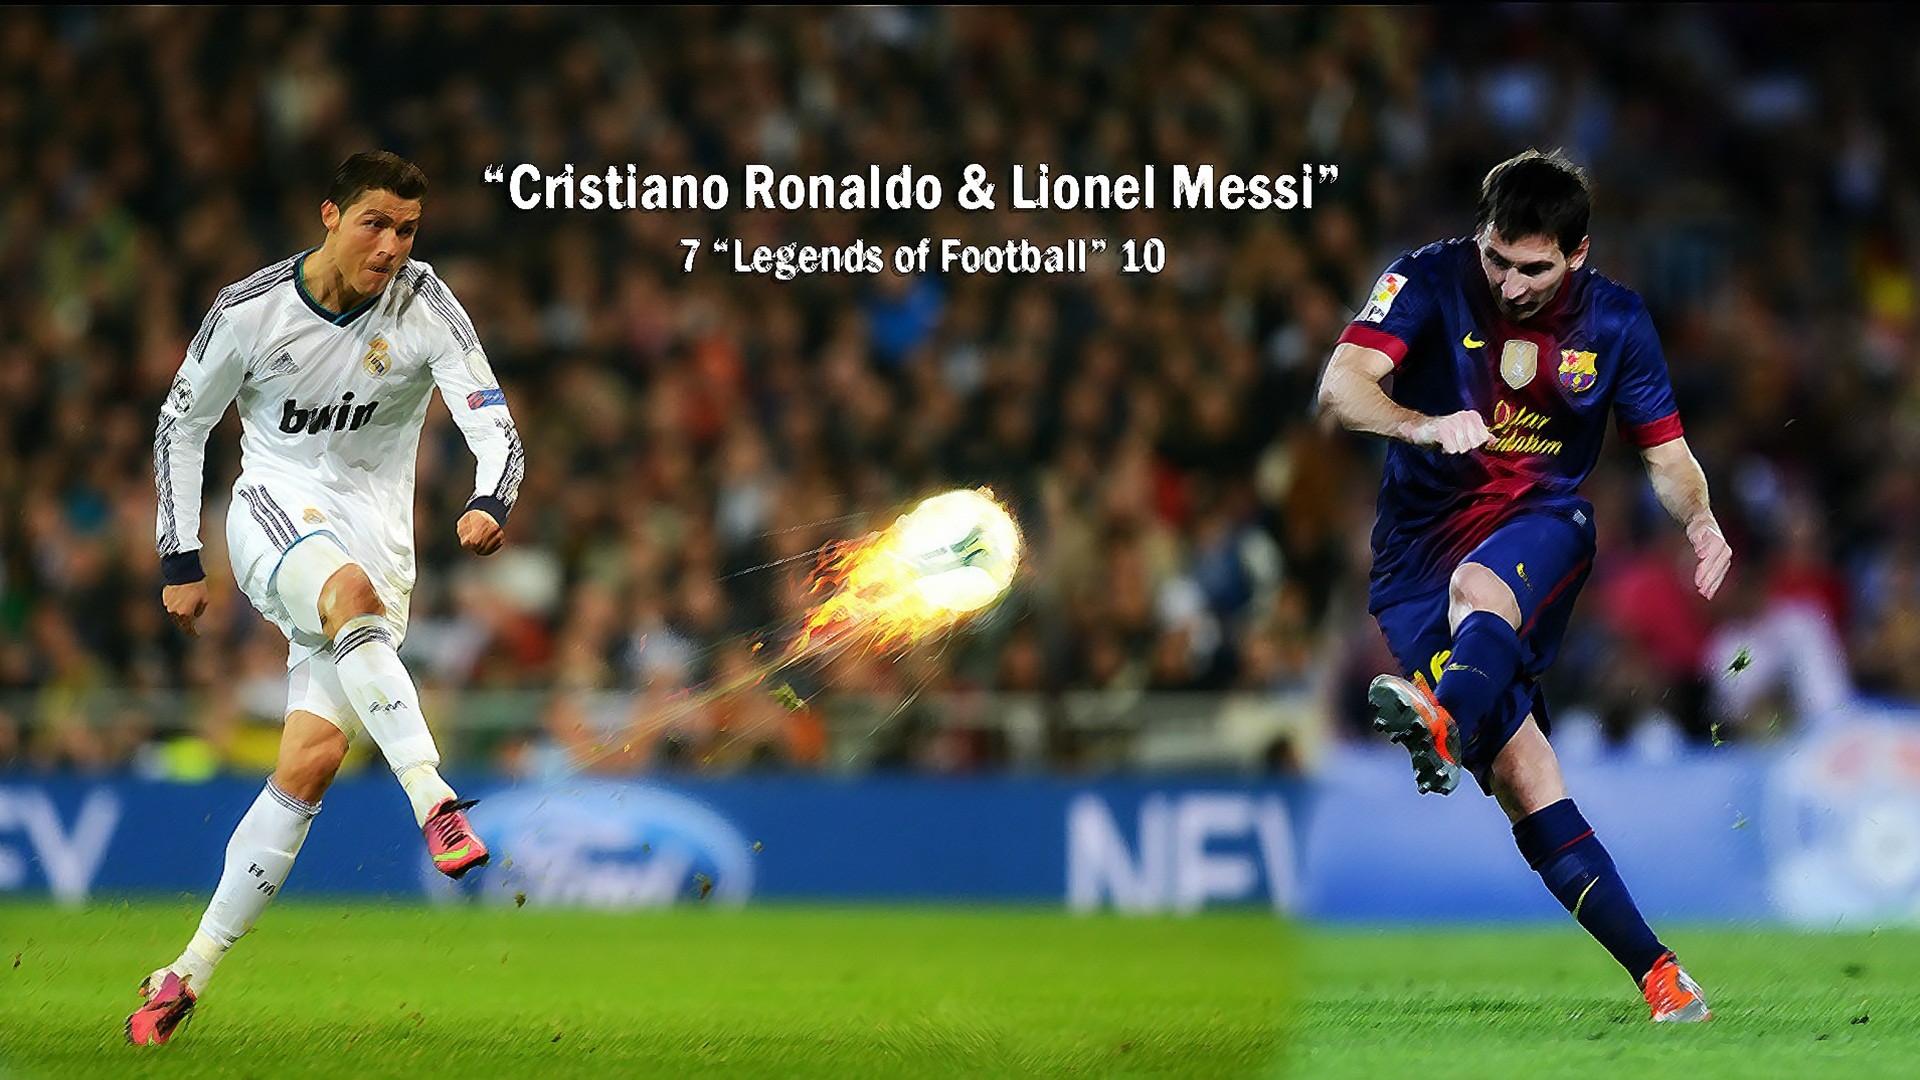 1920x1080 Cristiano Ronaldo with Lionel Messi - Ball on Fire Wallpaper - MegaSoccer  Blog